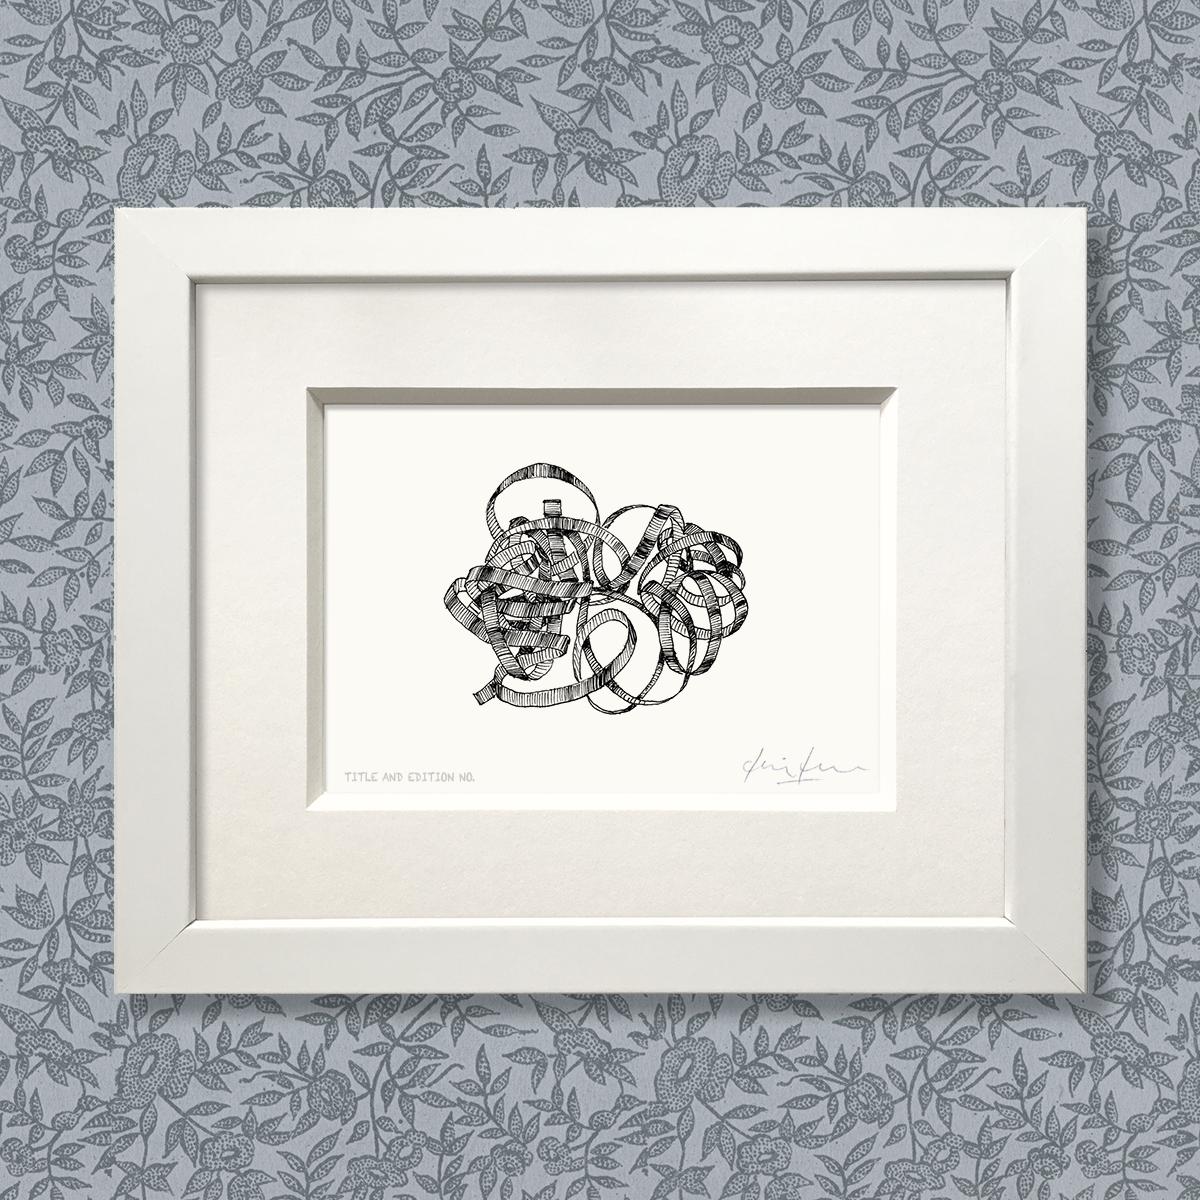 Limited edition print from pen and ink drawing of a ribbon in a white frame